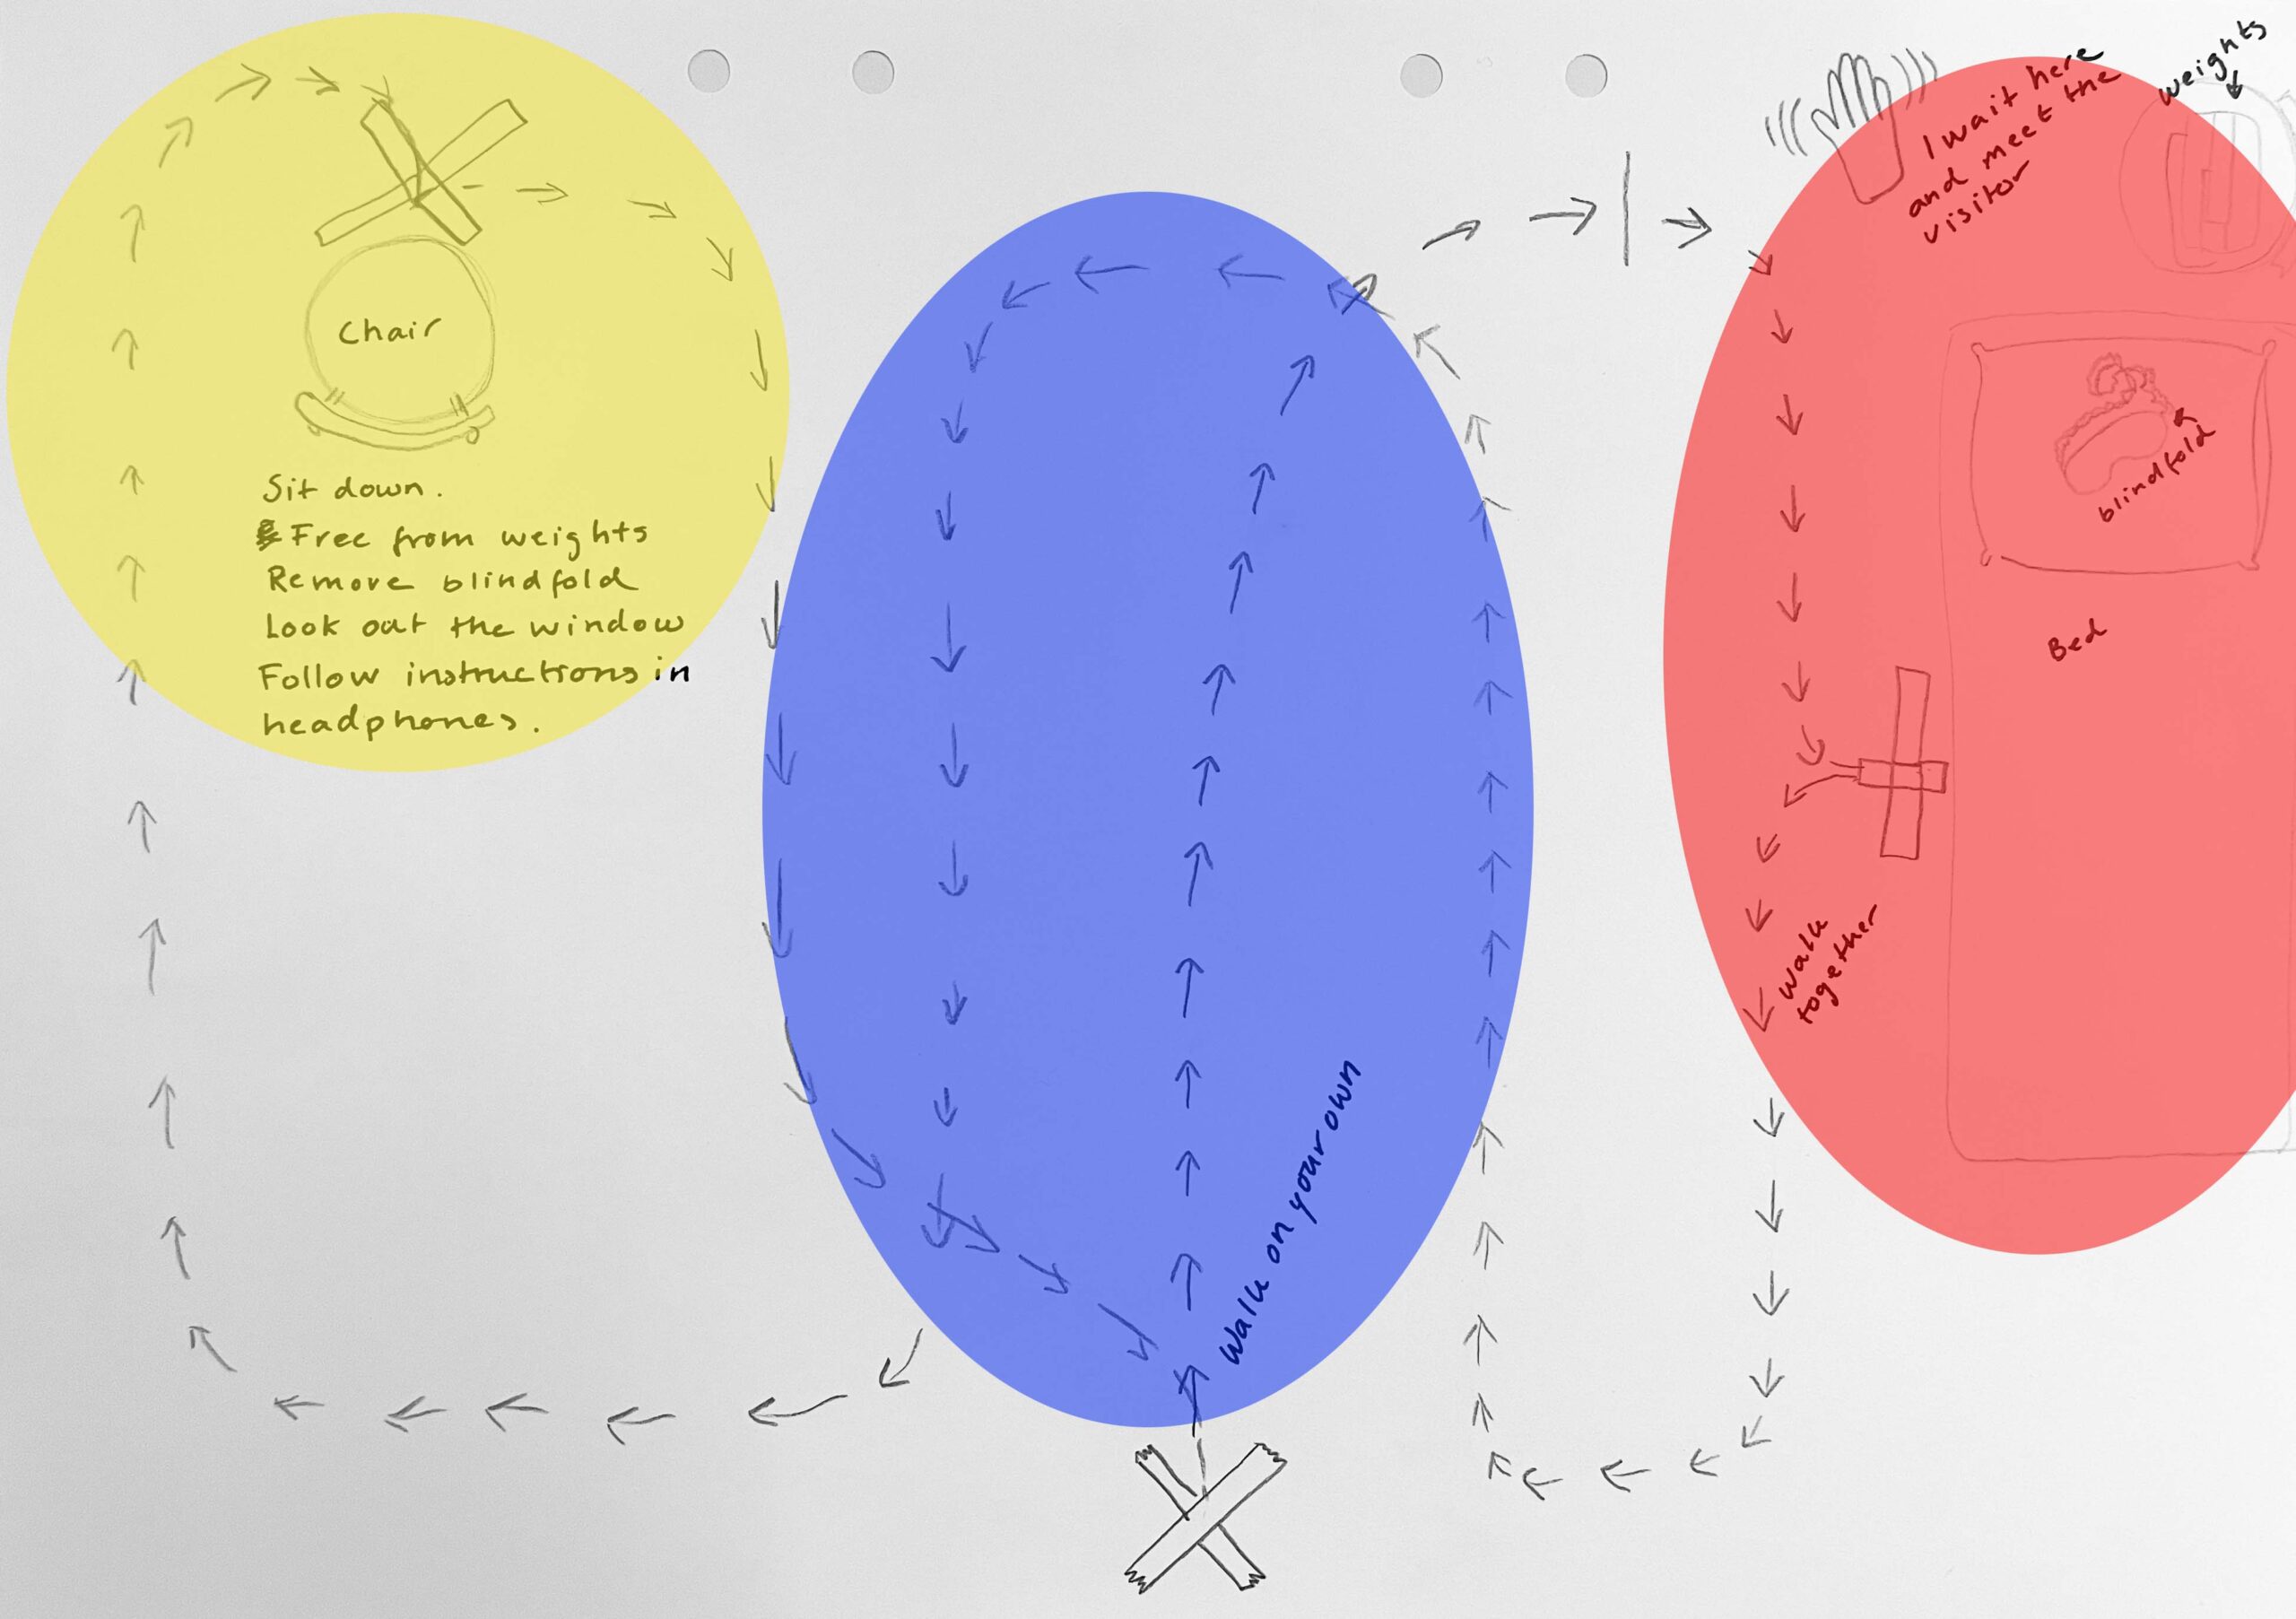 A sketch of a walking instruction on a performance. the picture has three different colored ovals in yellow, blue and red.